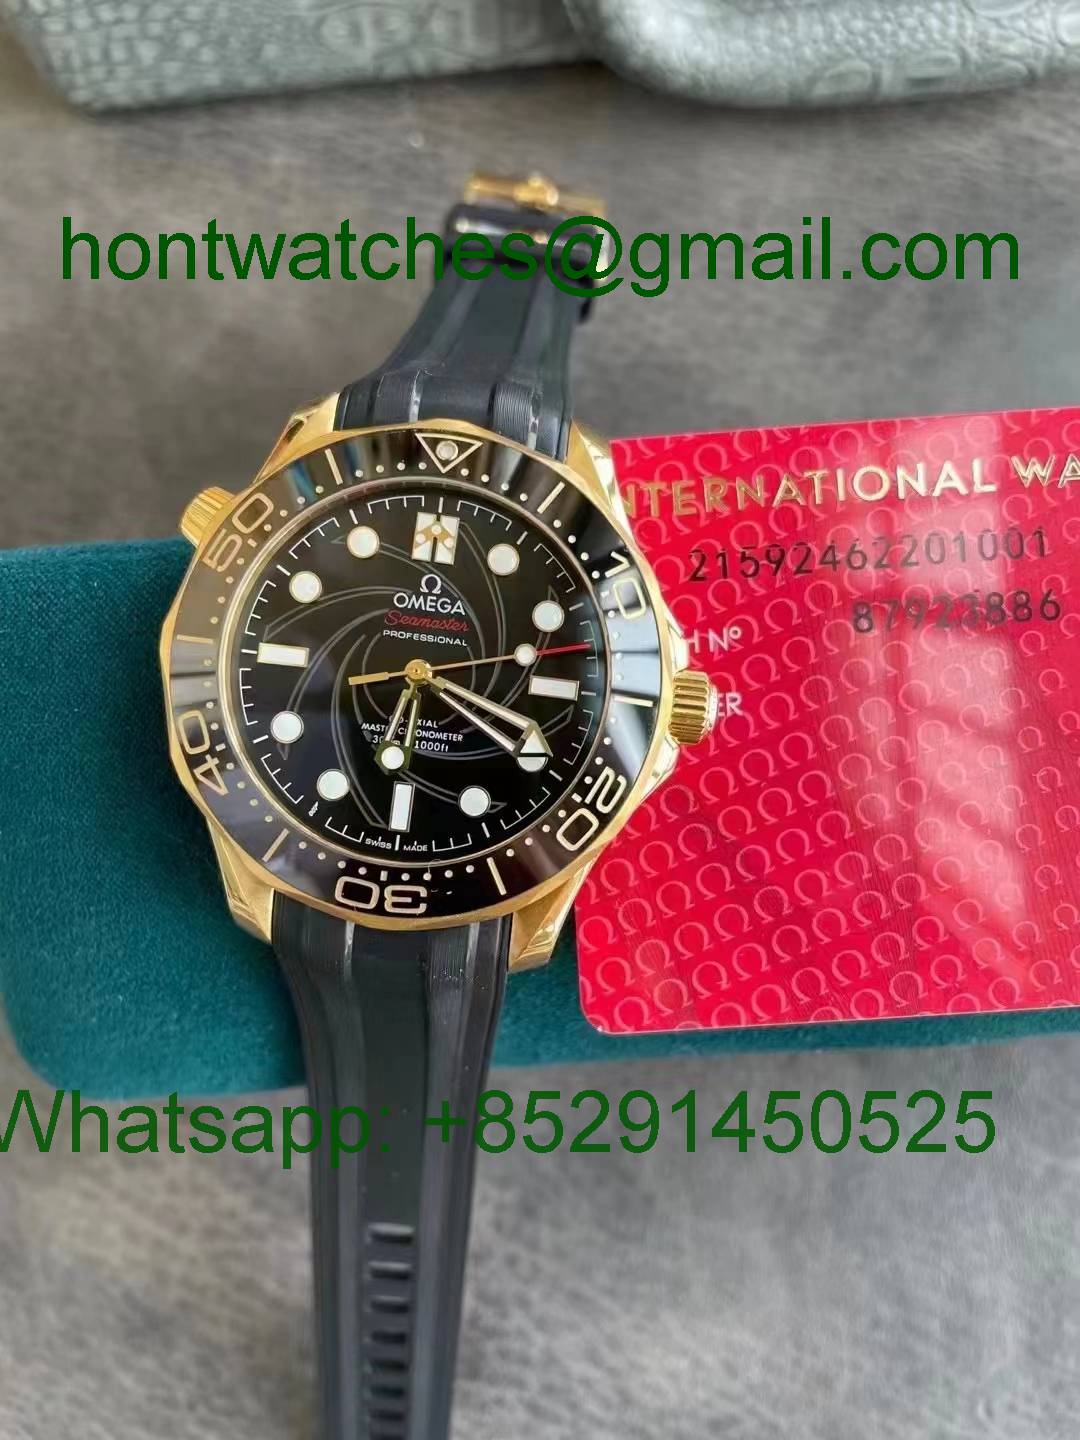 Replica OMEGA Seamaster Yellow Gold 007 James Bond VSF 1:1 Best Hontwatch Replica Watch Wholesale